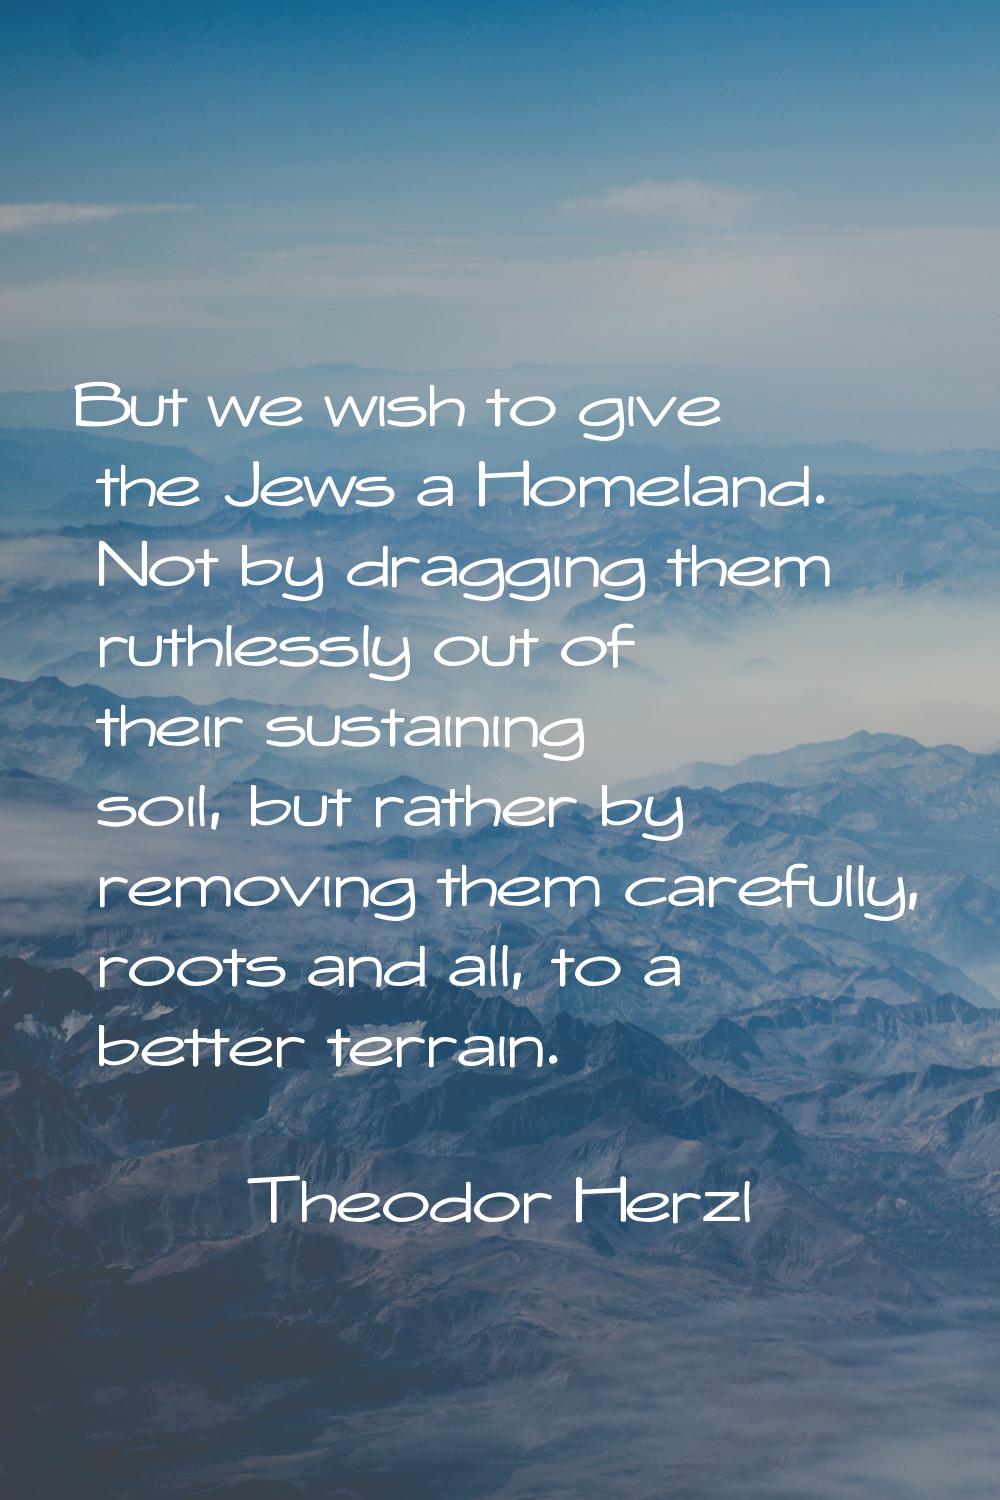 But we wish to give the Jews a Homeland. Not by dragging them ruthlessly out of their sustaining so